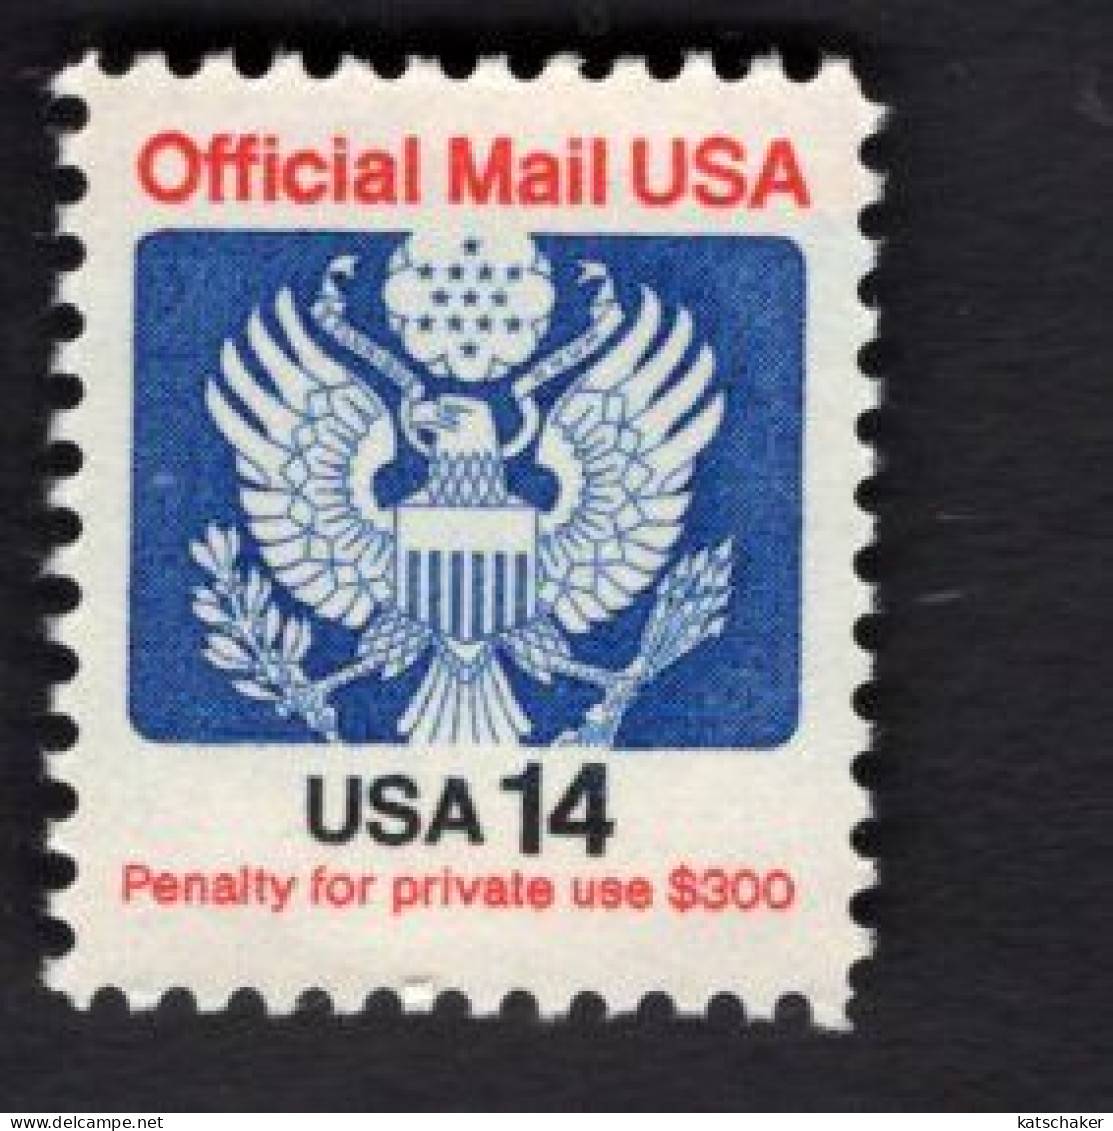 2008963262  1985 (XX) SCOTT O129a POSTFRIS MINT NEVER HINGED Eagle And Shield Bird Vogel OFFICIAL MAIL - Oficial